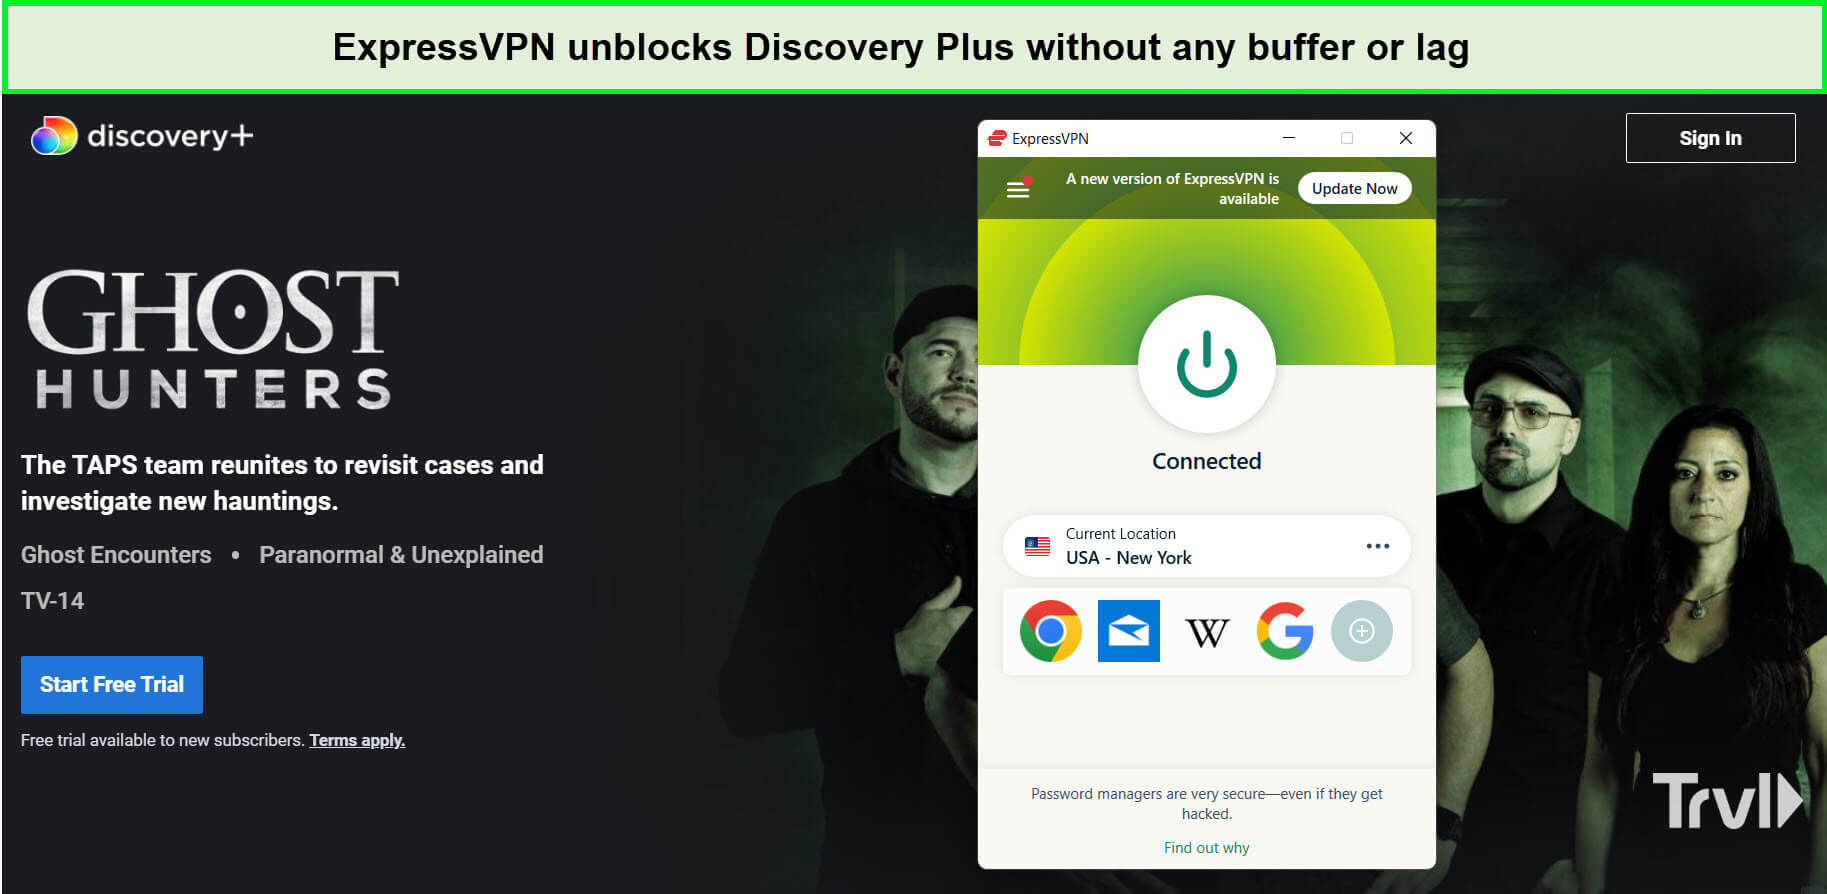 expressvpn-unblocks-ghost-hunters-on-discovery-plus-in-Singapore